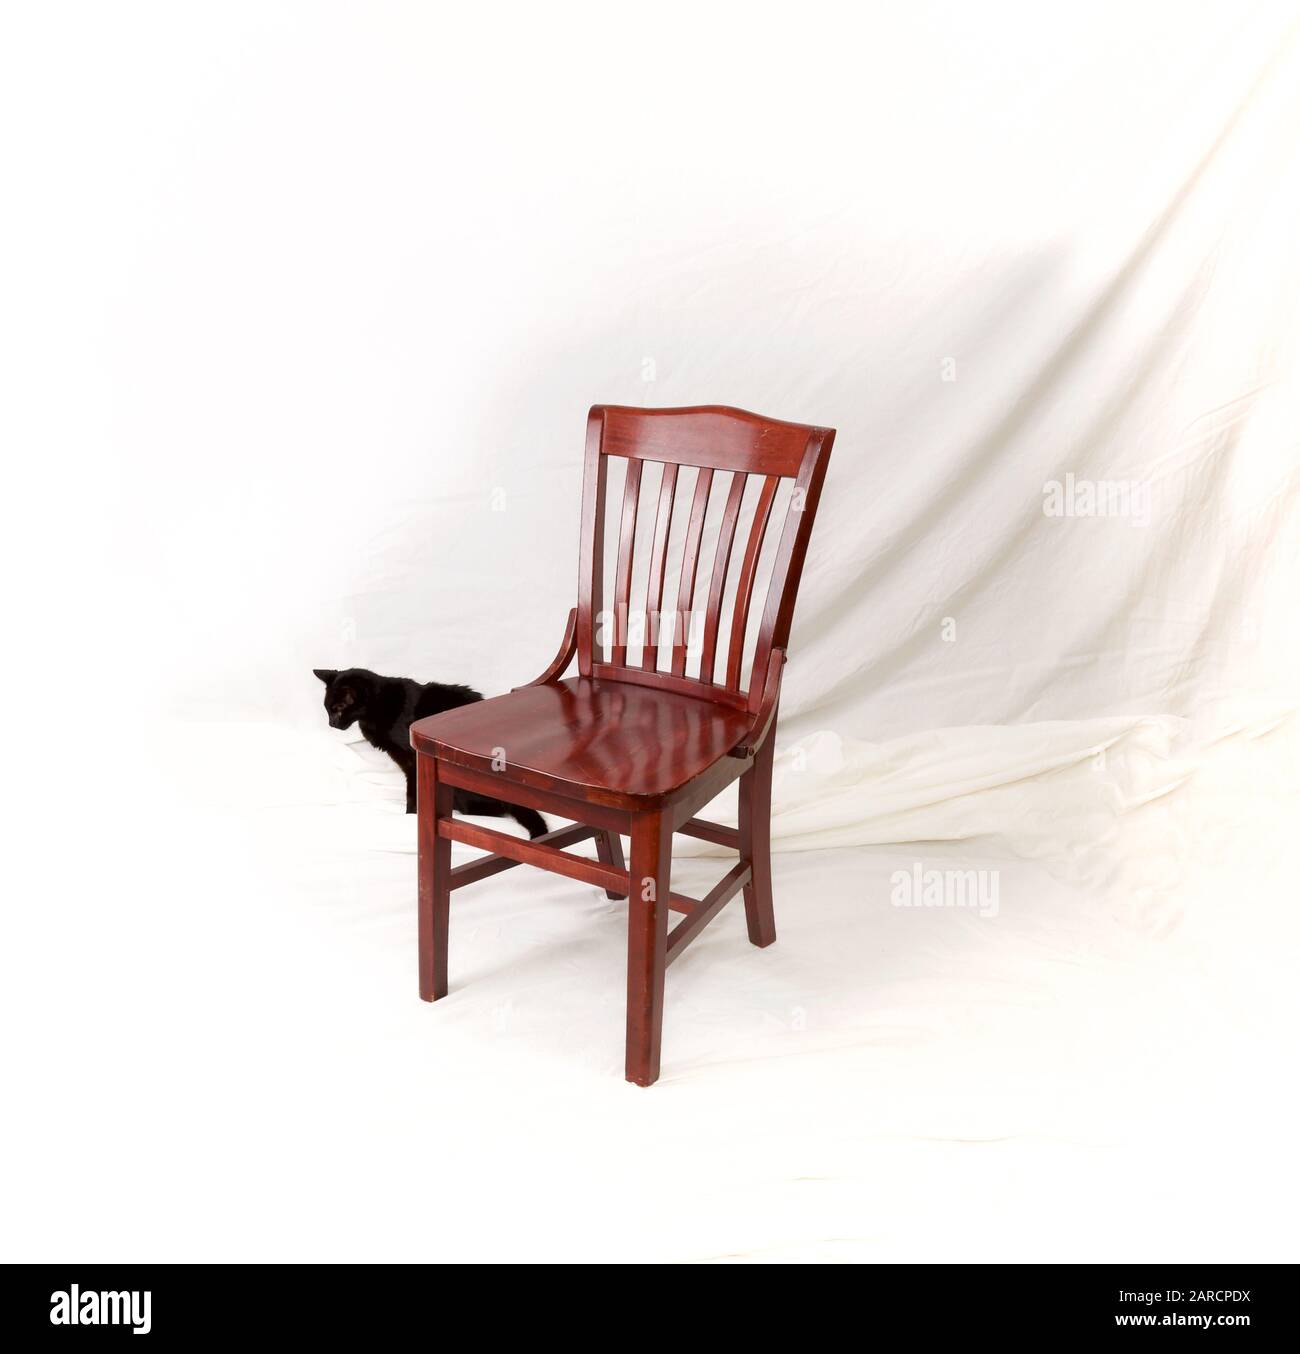 An empty red wooden chair with black cat sitting behind it on white cloth  studio background Stock Photo - Alamy